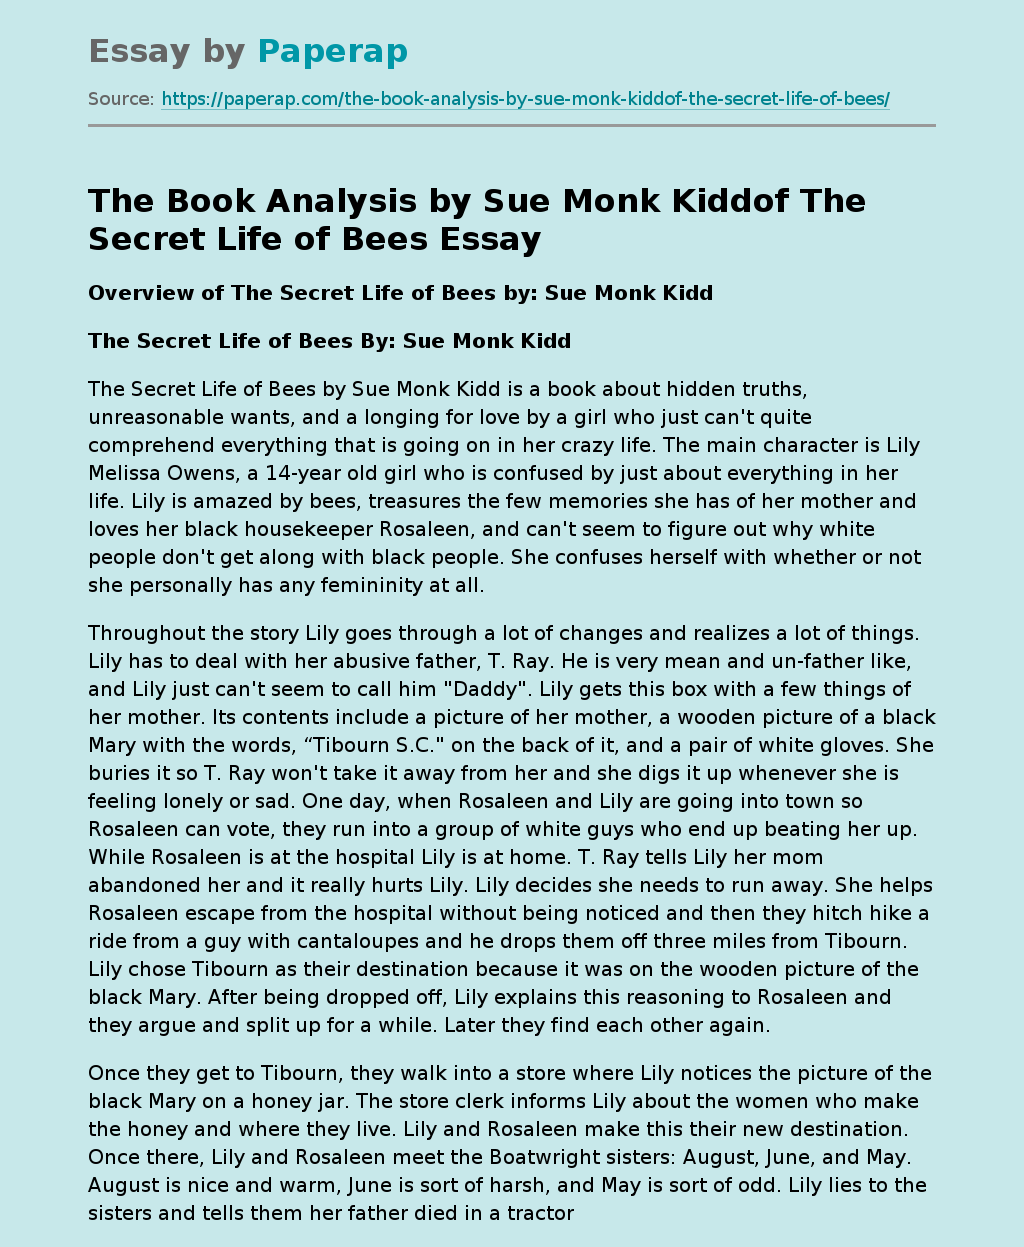 The Book Analysis by Sue Monk Kiddof The Secret Life of Bees